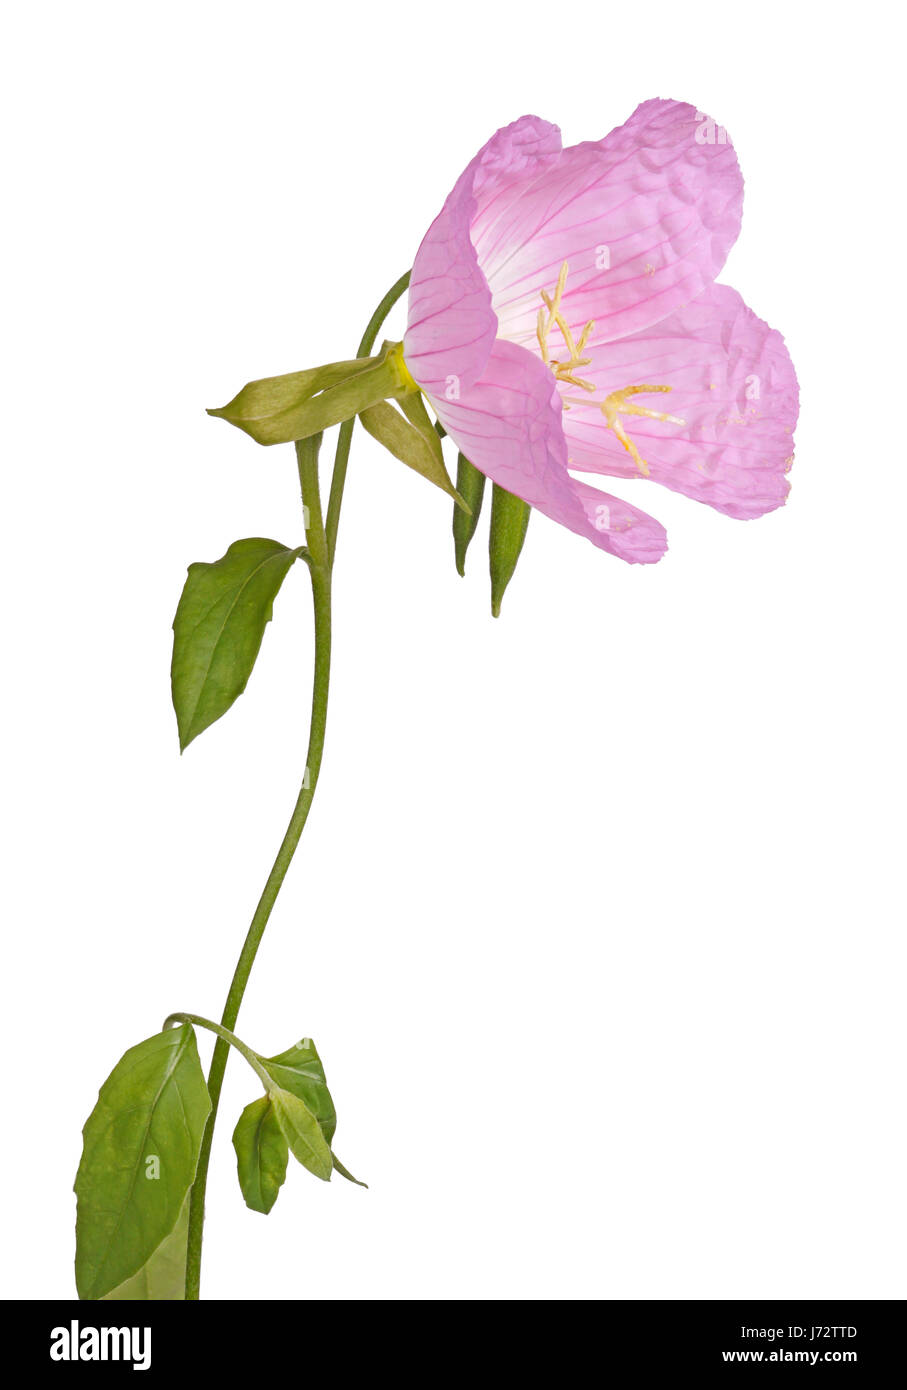 Side view of a single flower, stem, leaves and bud of the pink evening primrose (Oenothera speciosa) isolated against a white background Stock Photo